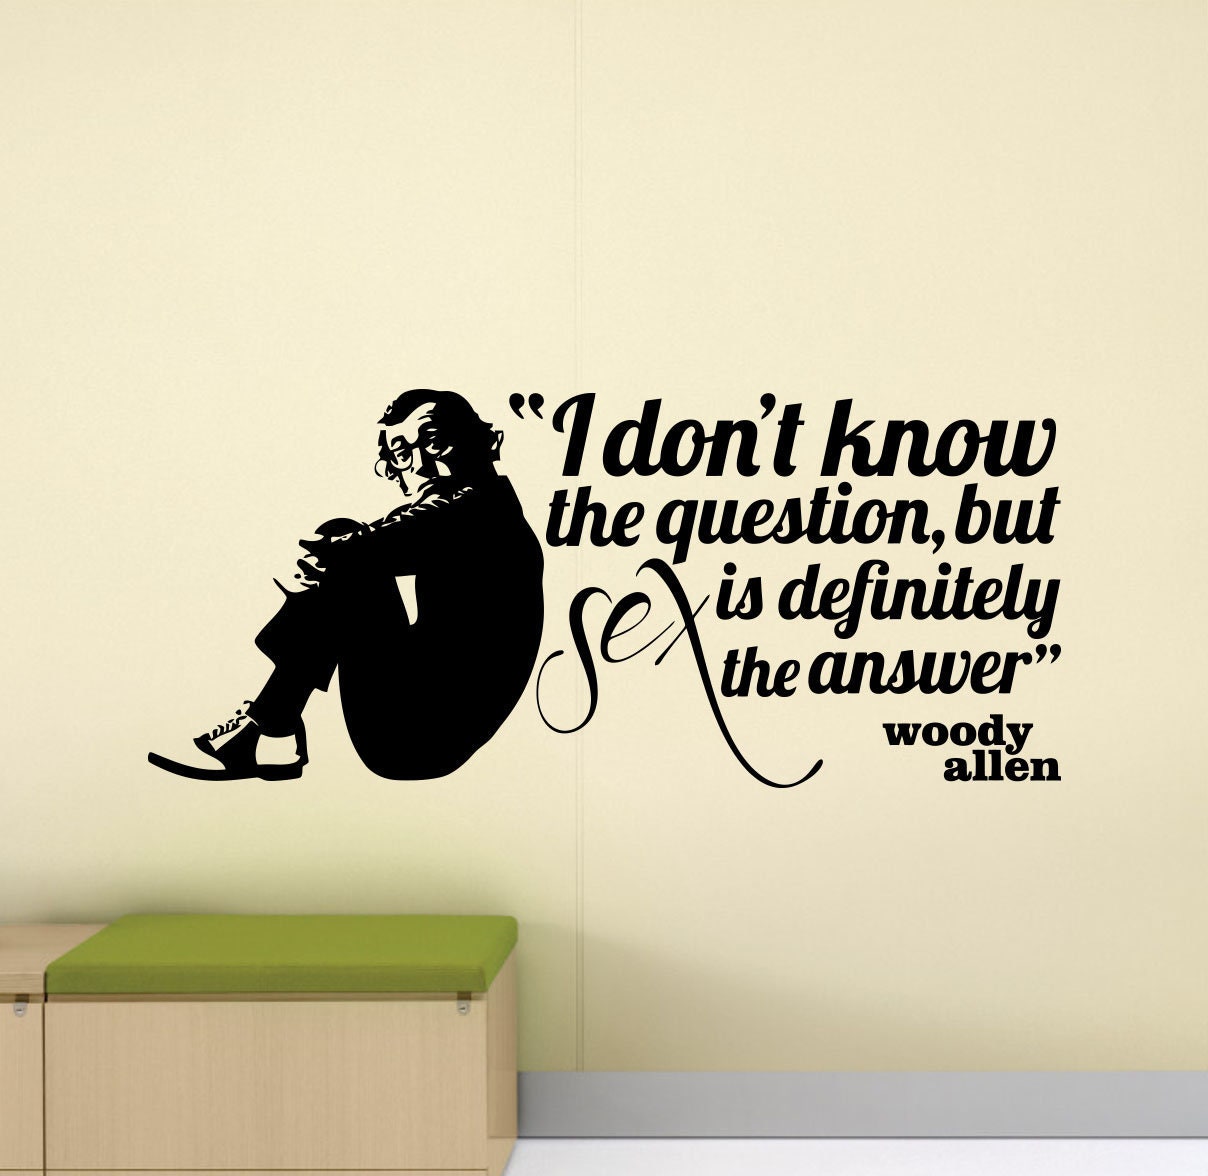 Woody Allen Quote Wall Decal Sex Decor Sign Bedroom Poster